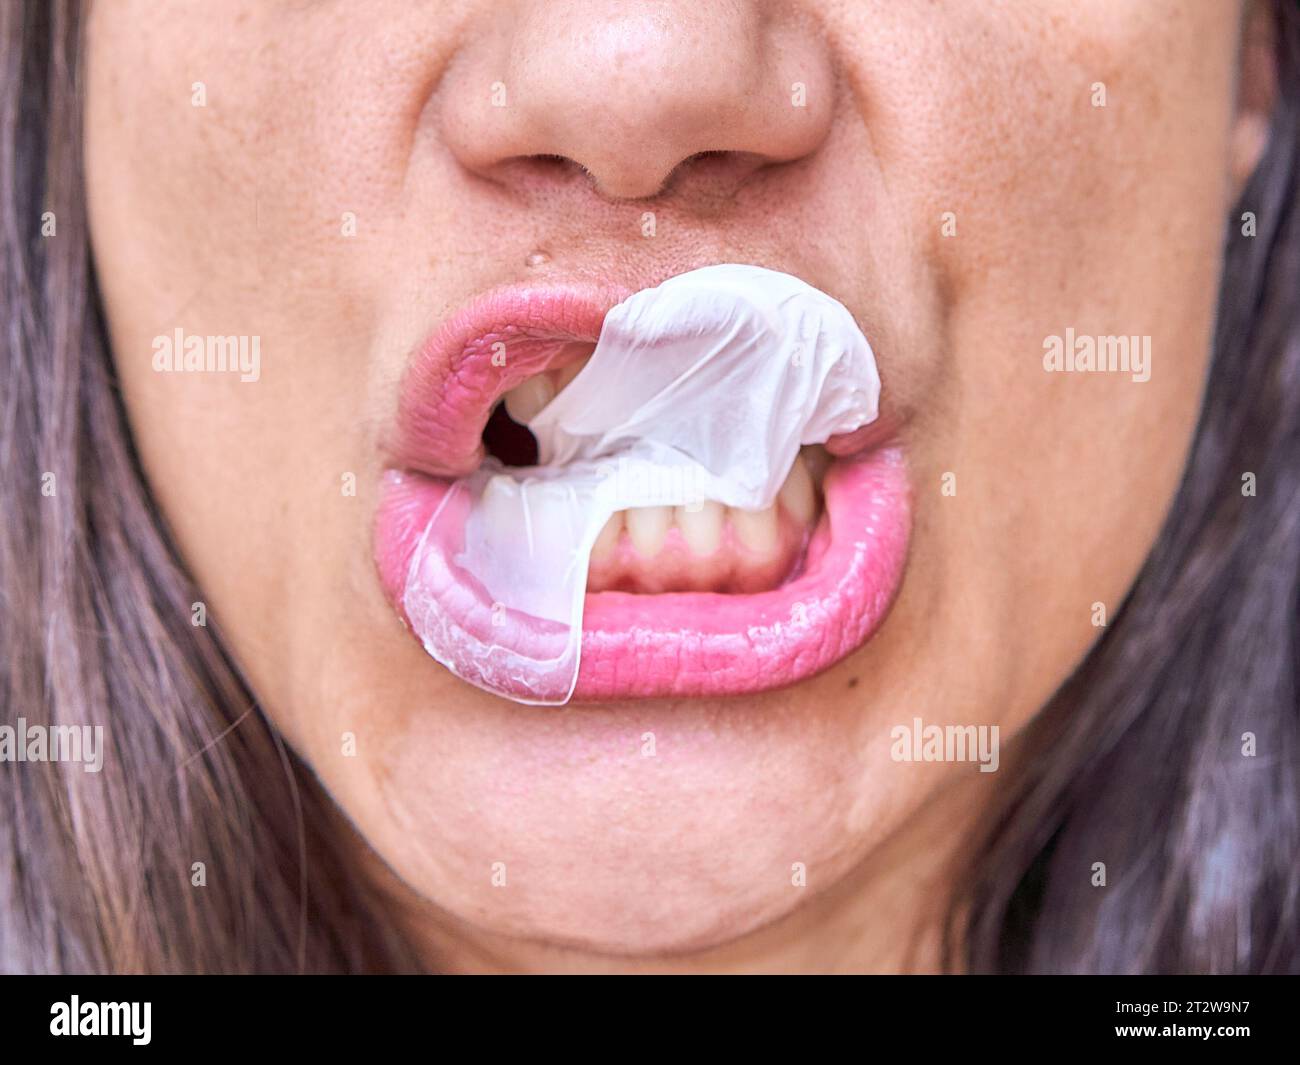 woman mouth showing teeth after a chewing gun balloon explosion Stock Photo